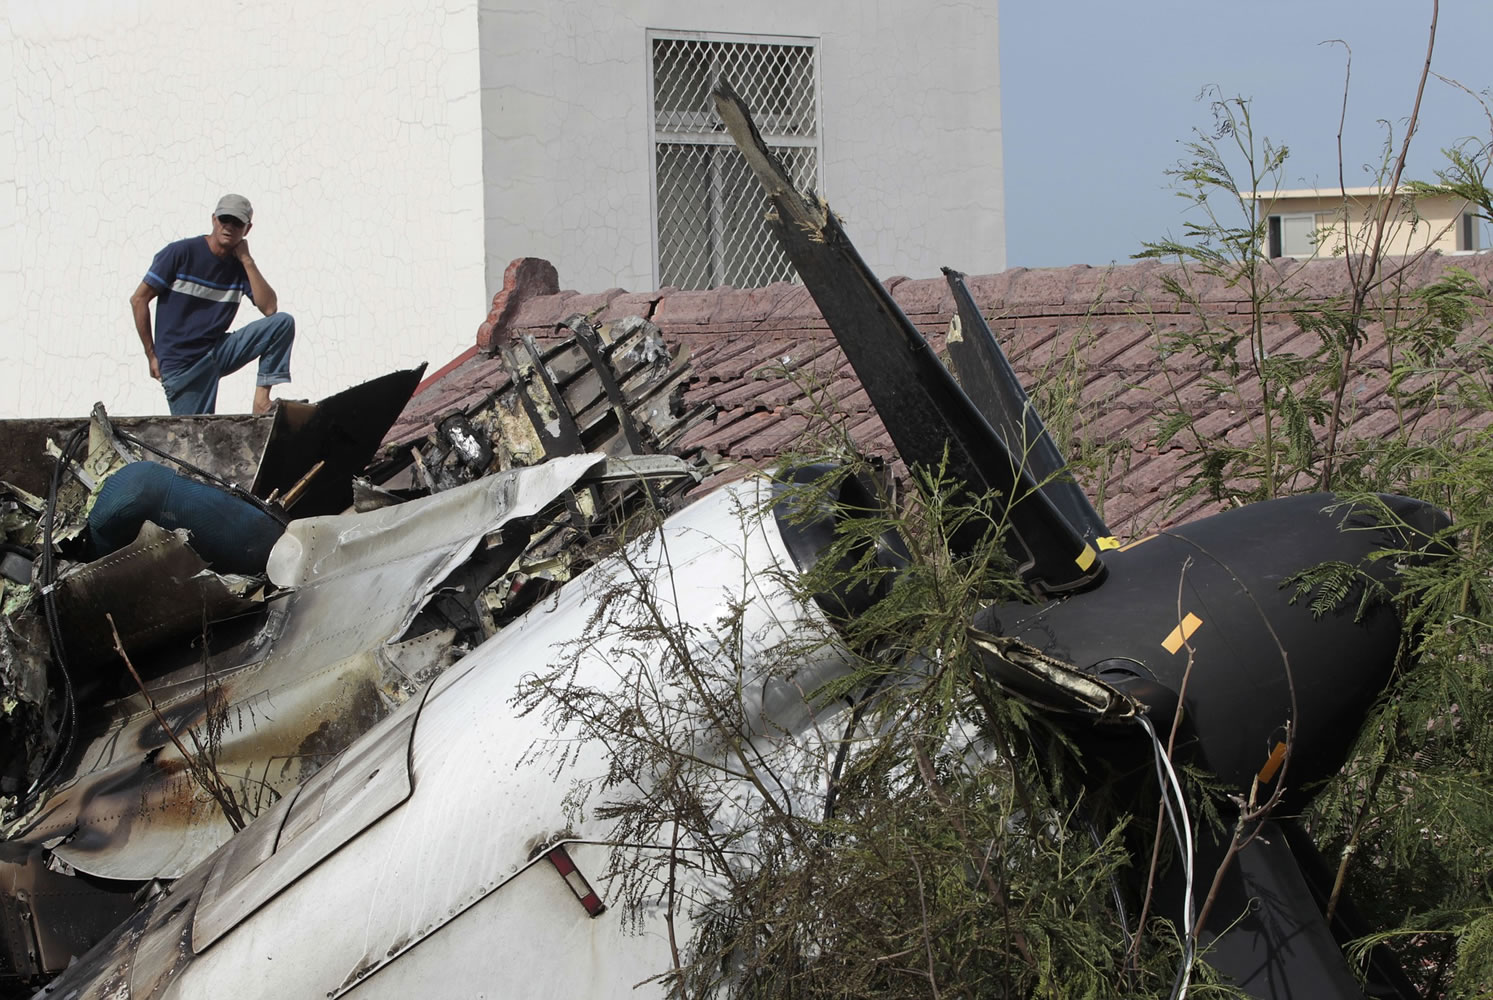 A resident watches the forensic investigation among the wreckage of crashed TransAsia Airways flight GE222 on the outlying island of Penghu, Taiwan, on Thursday.